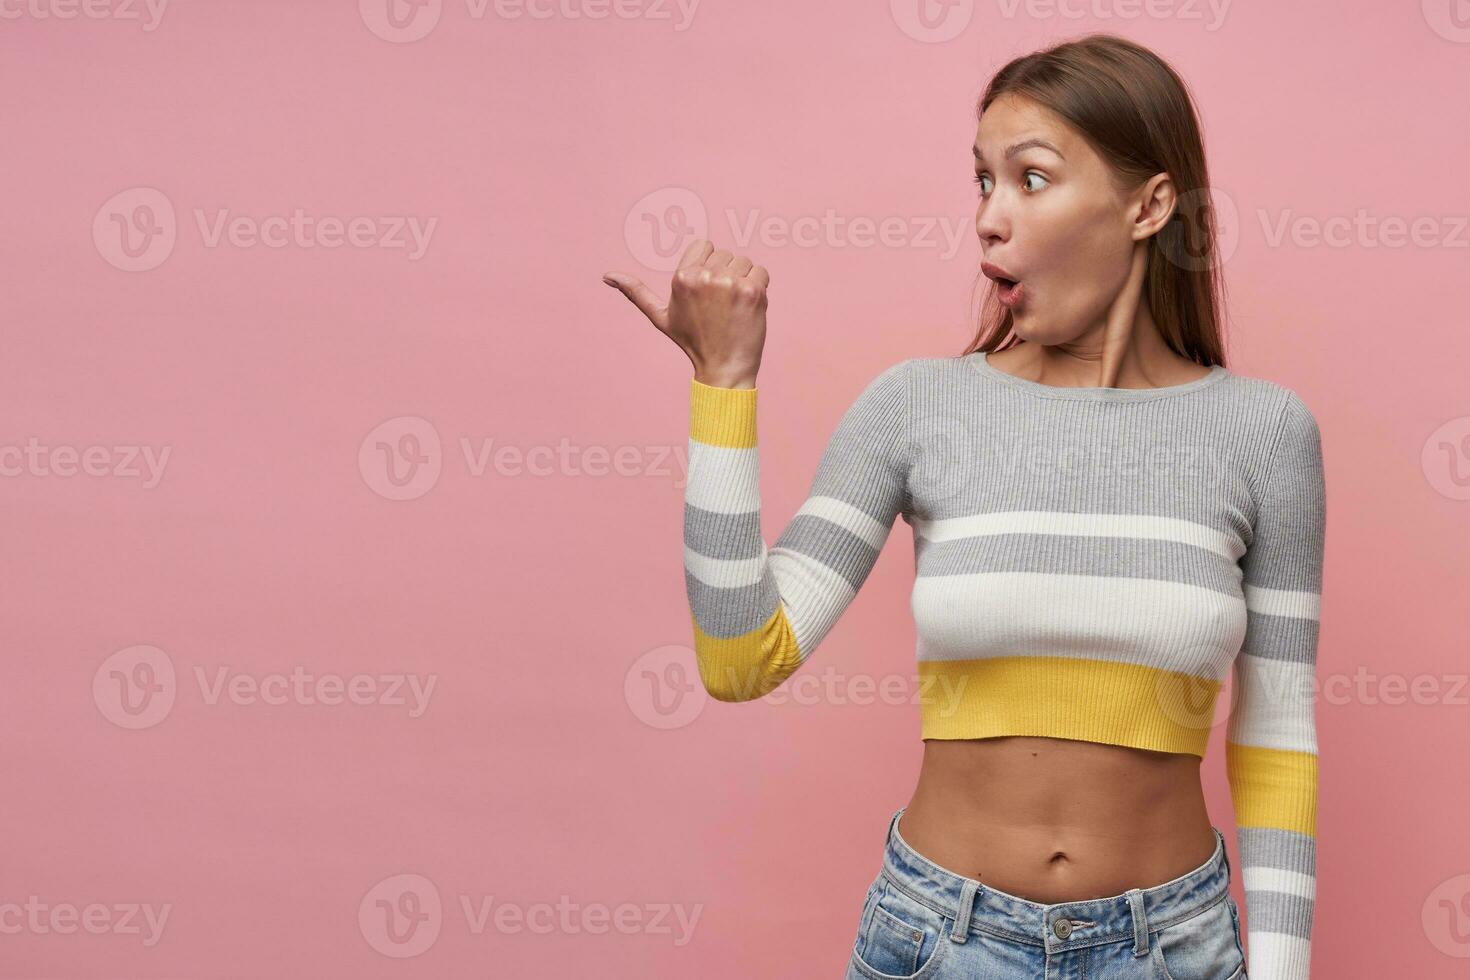 Young lady, pretty woman with brown long hair. Wearing striped blouse and jeans. Shocked, pointing with thumb and watching to the left at copy space, isolated, over pastel pink background photo